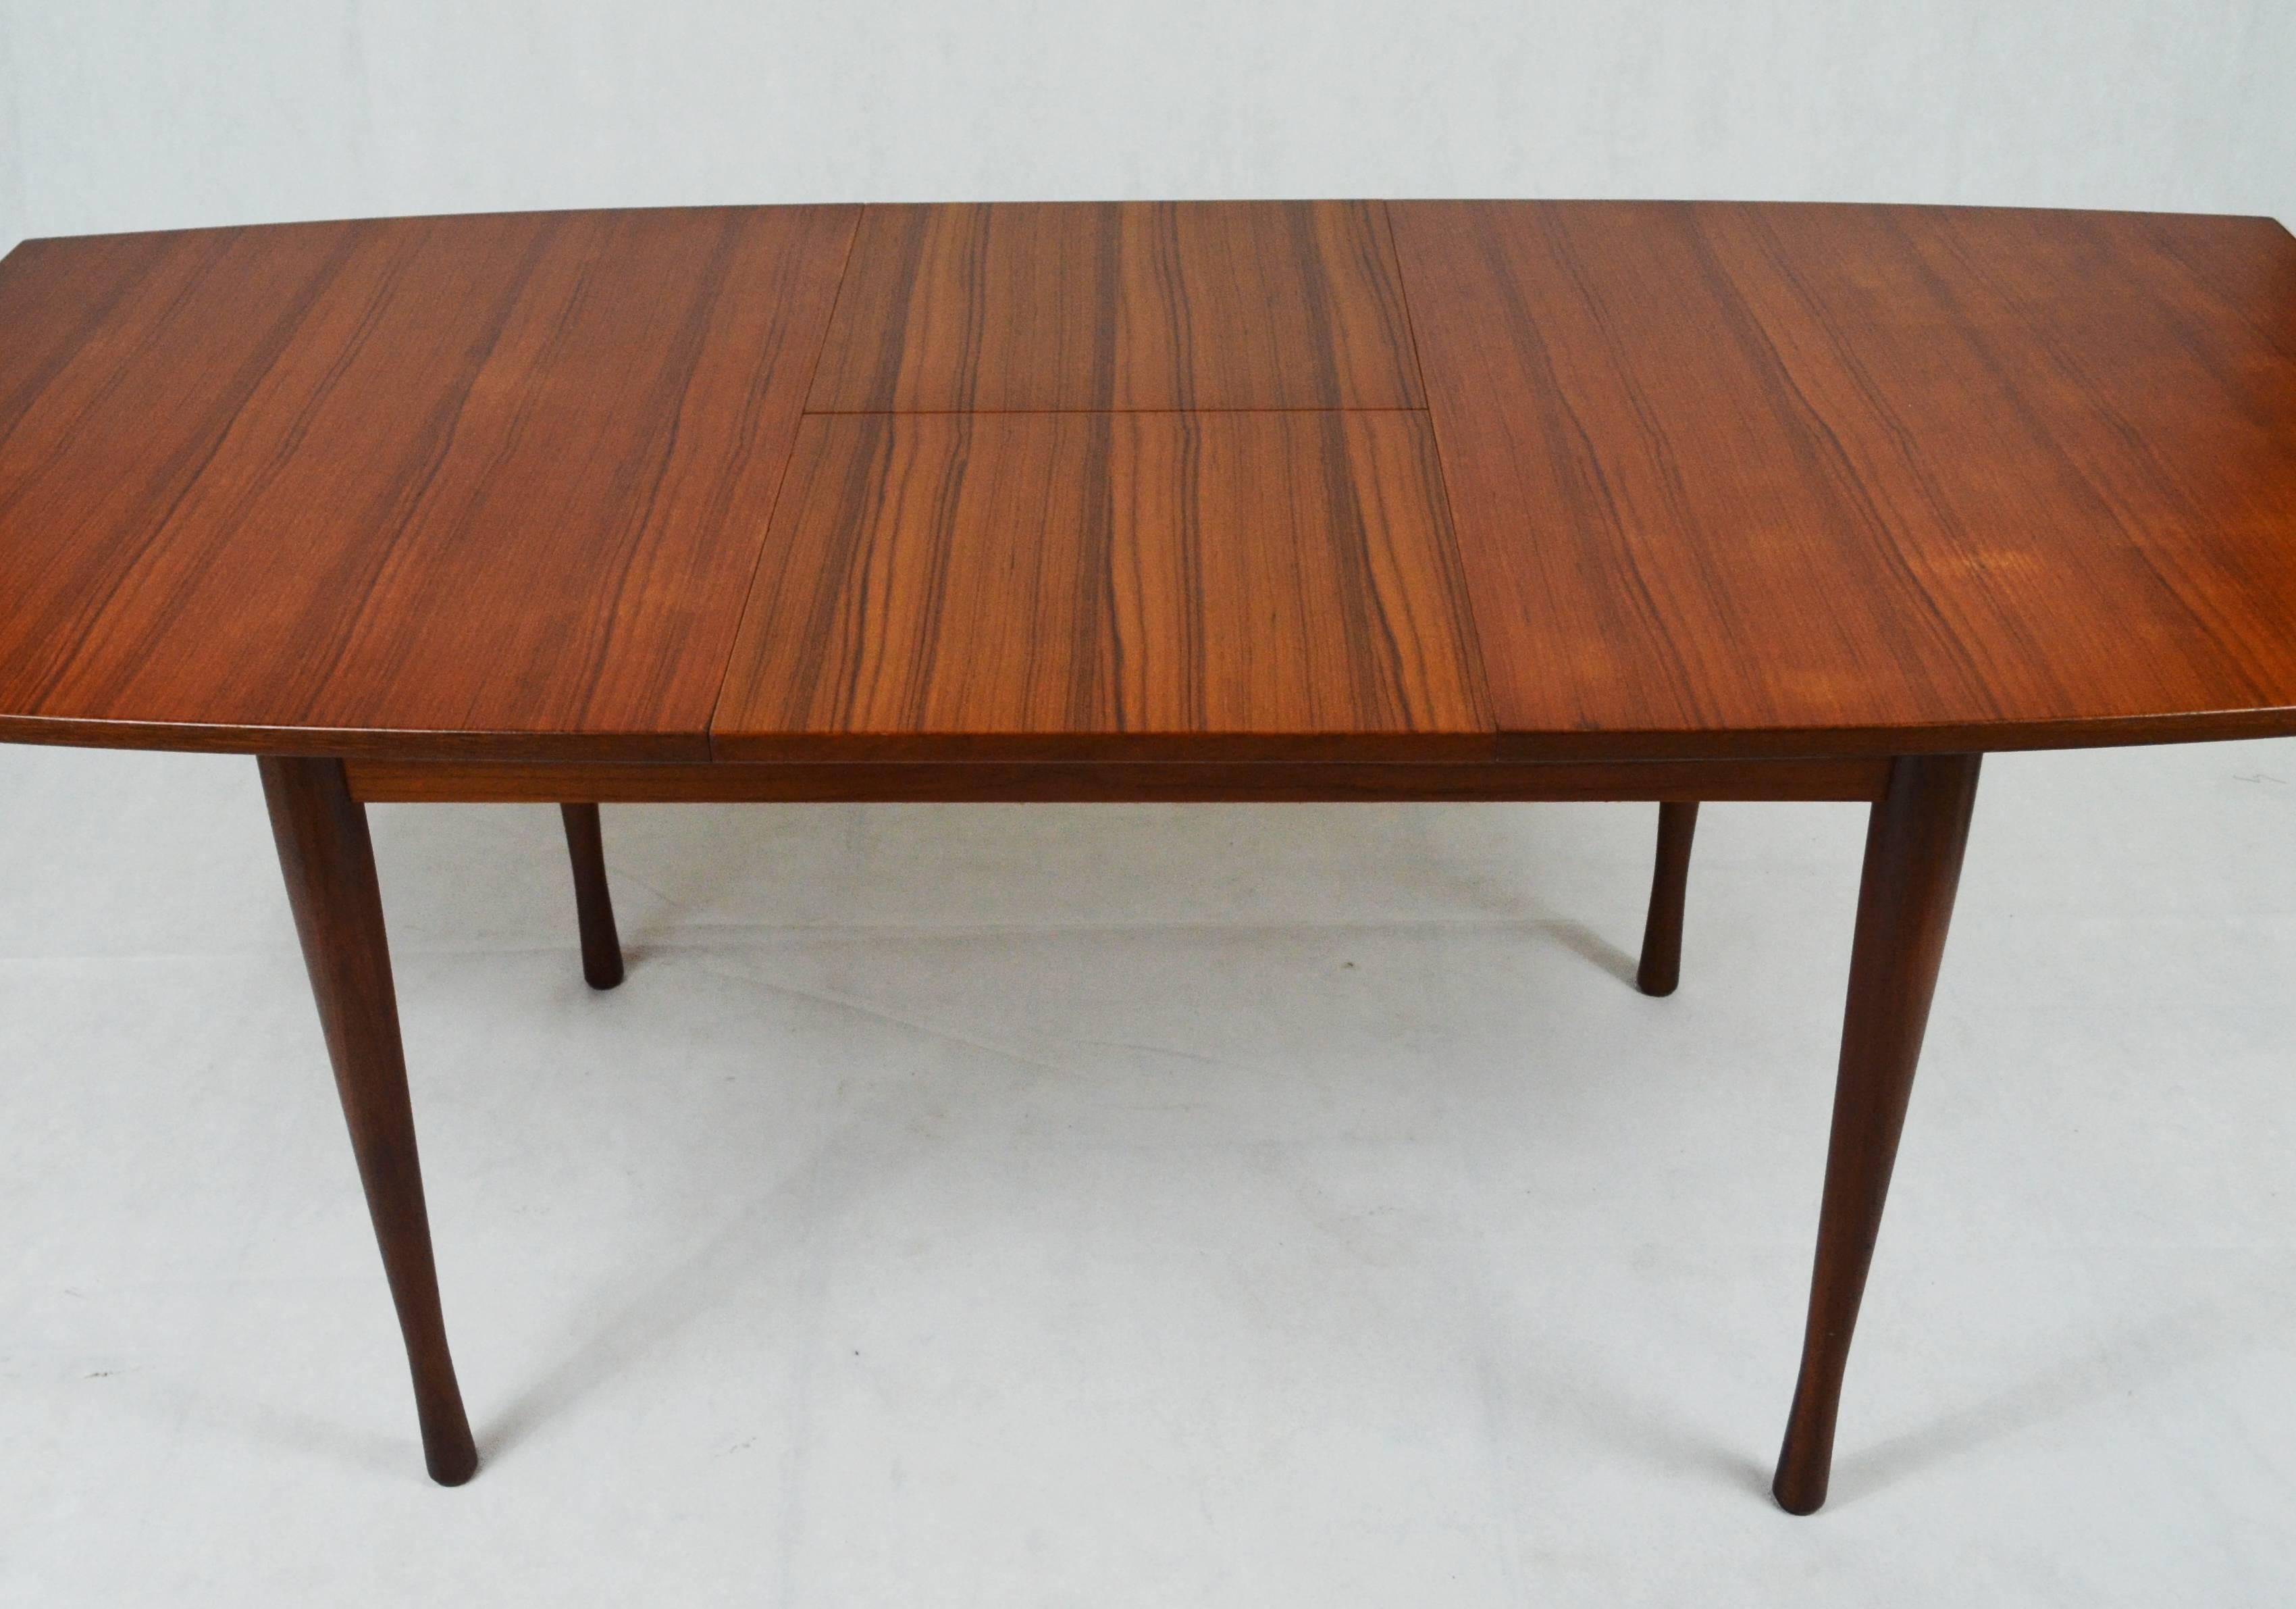 Swedish style extensible table, Italy, 1960s. Teakwood, divided in the middle to permit the table to be open when needed. The extensions are in teakwood as well and they are folded under the top. All the body and the legs are made of teakwood.
It